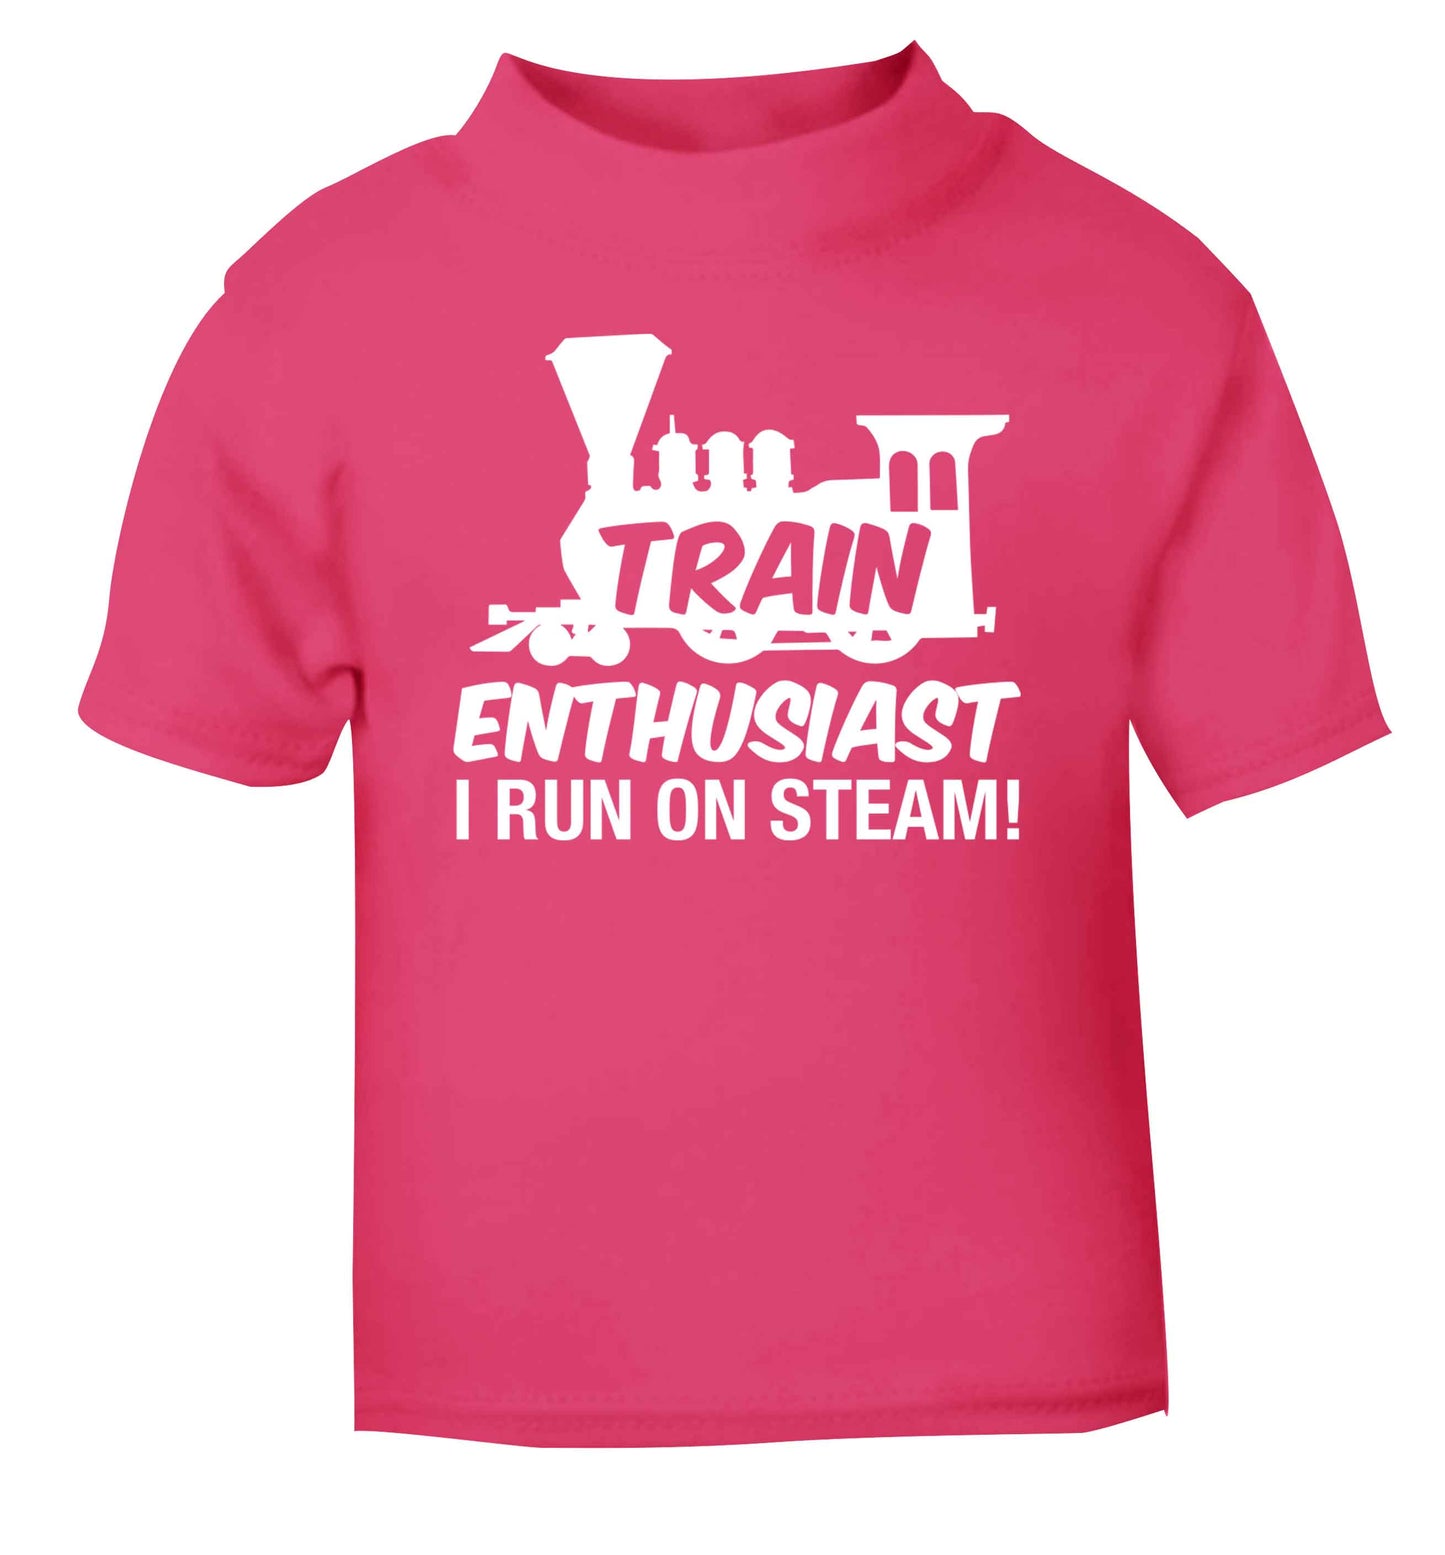 Train enthusiast I run on steam pink Baby Toddler Tshirt 2 Years